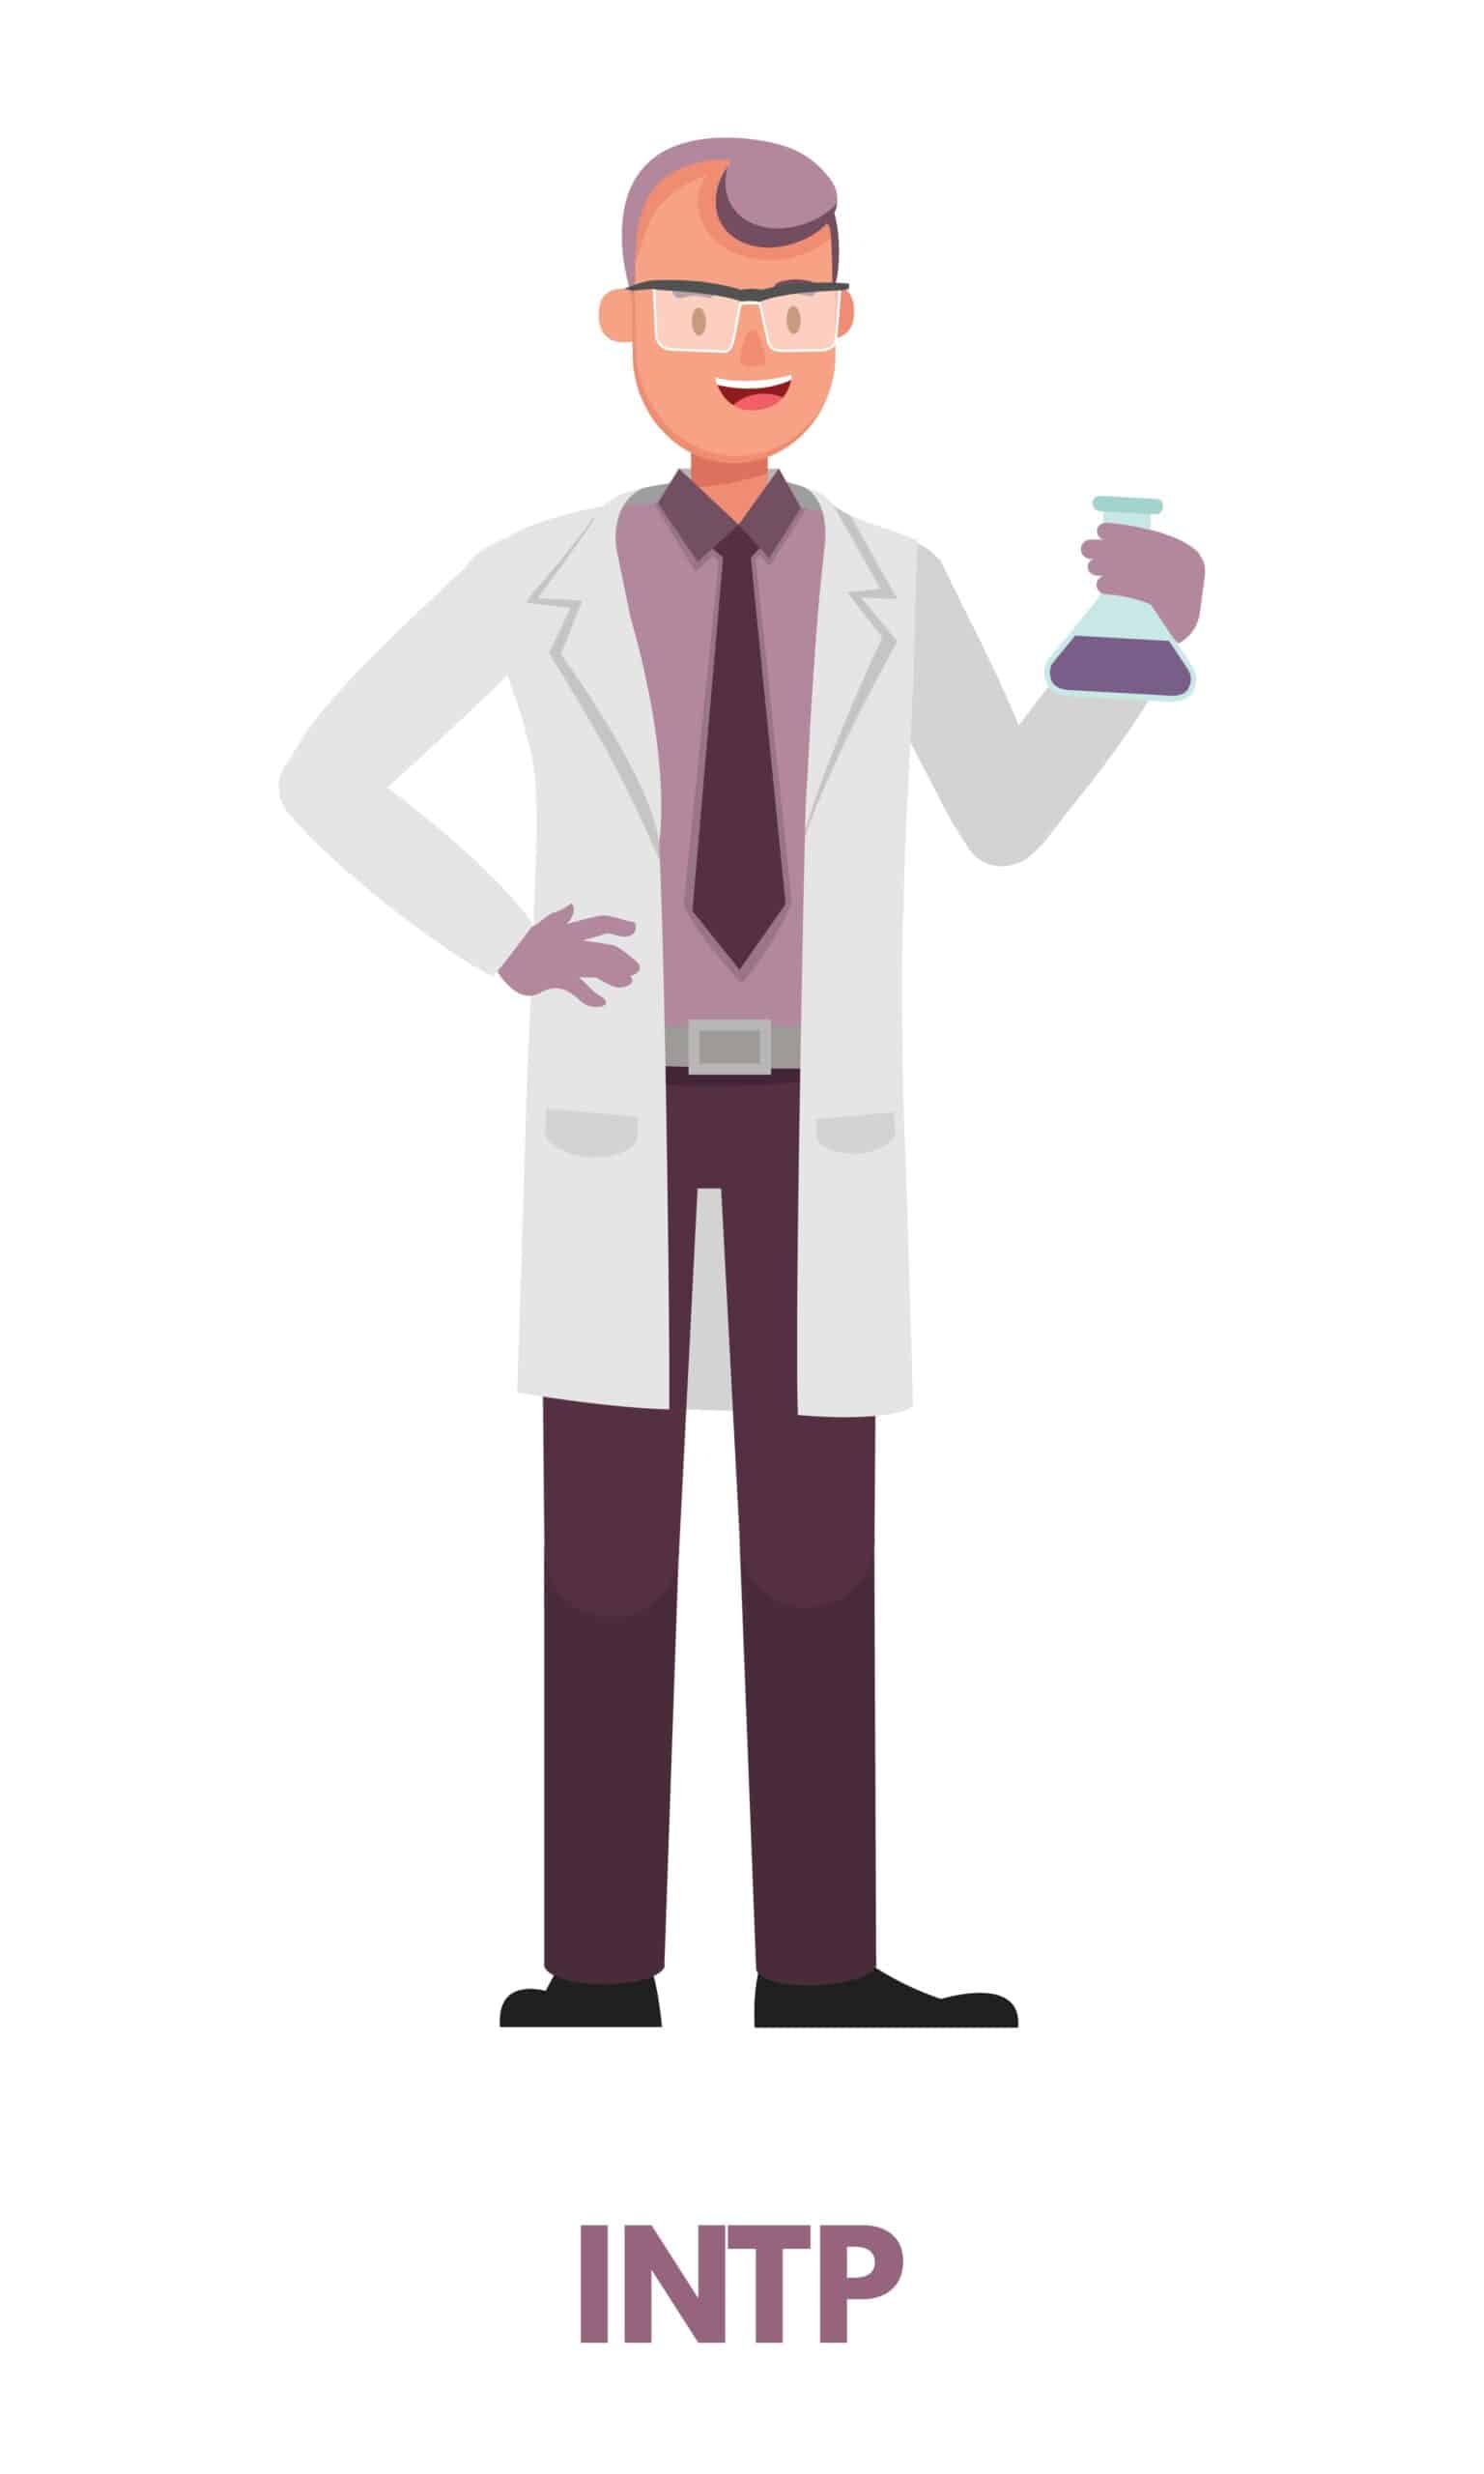 Scientist,Logician,Man,In,Purple,Clothing,Represents,Intp,Analyst,Personality